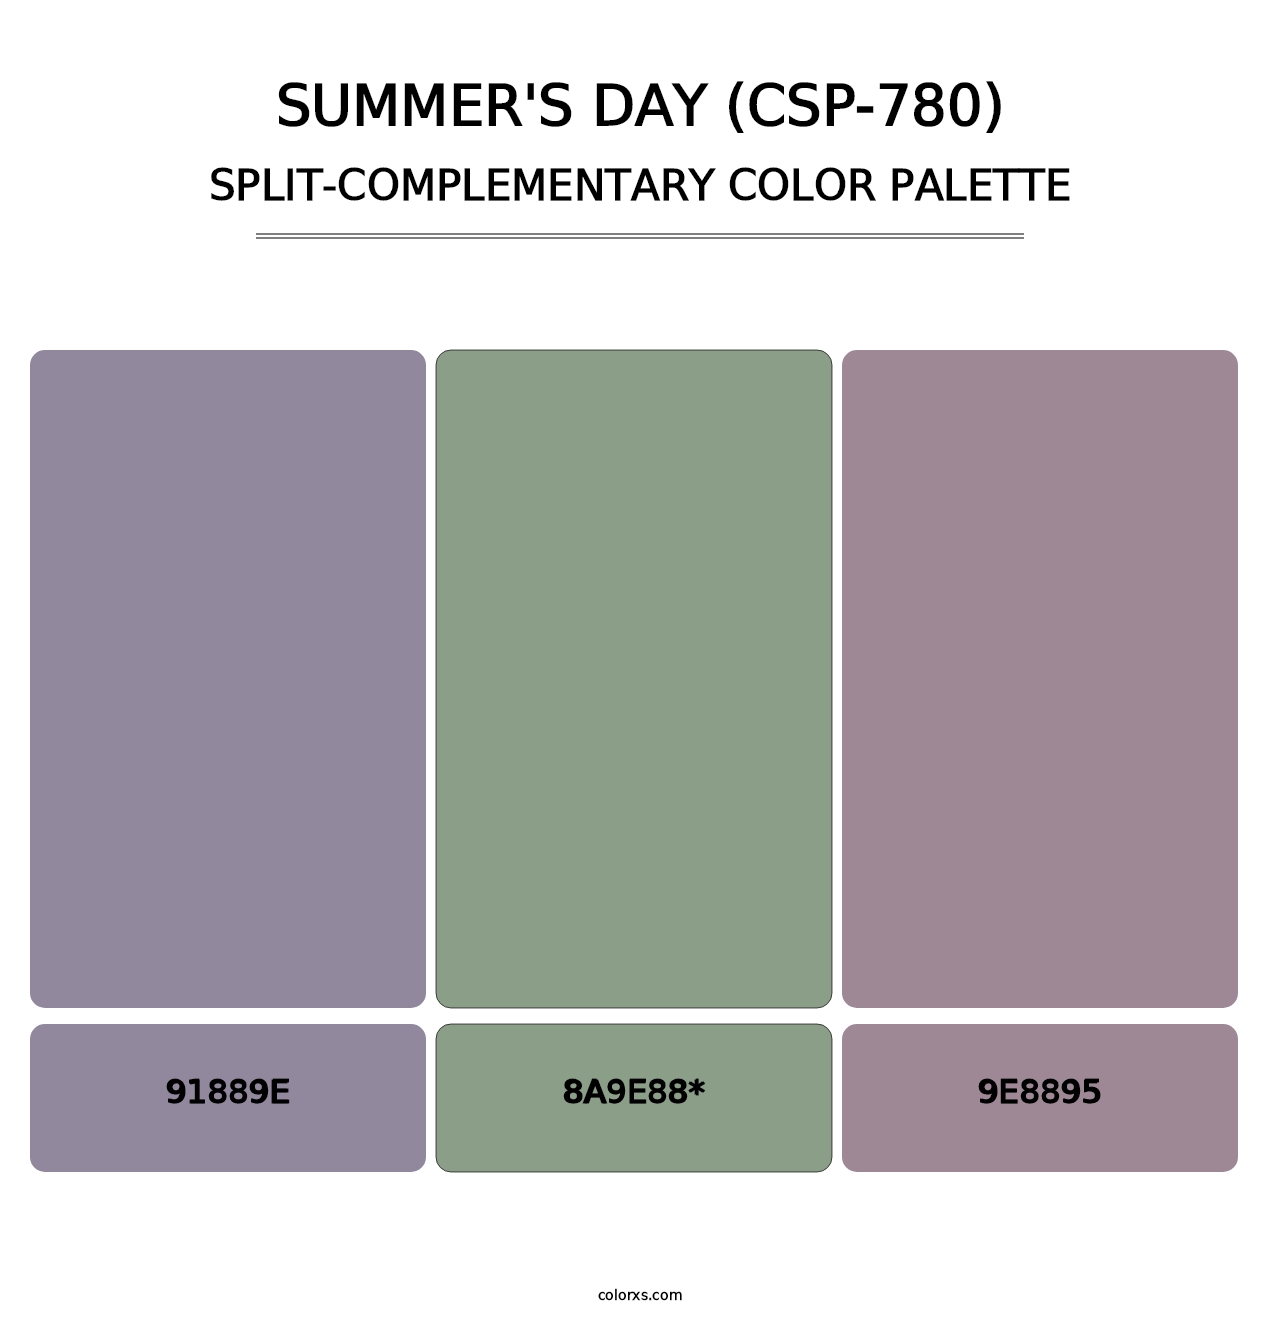 Summer's Day (CSP-780) - Split-Complementary Color Palette